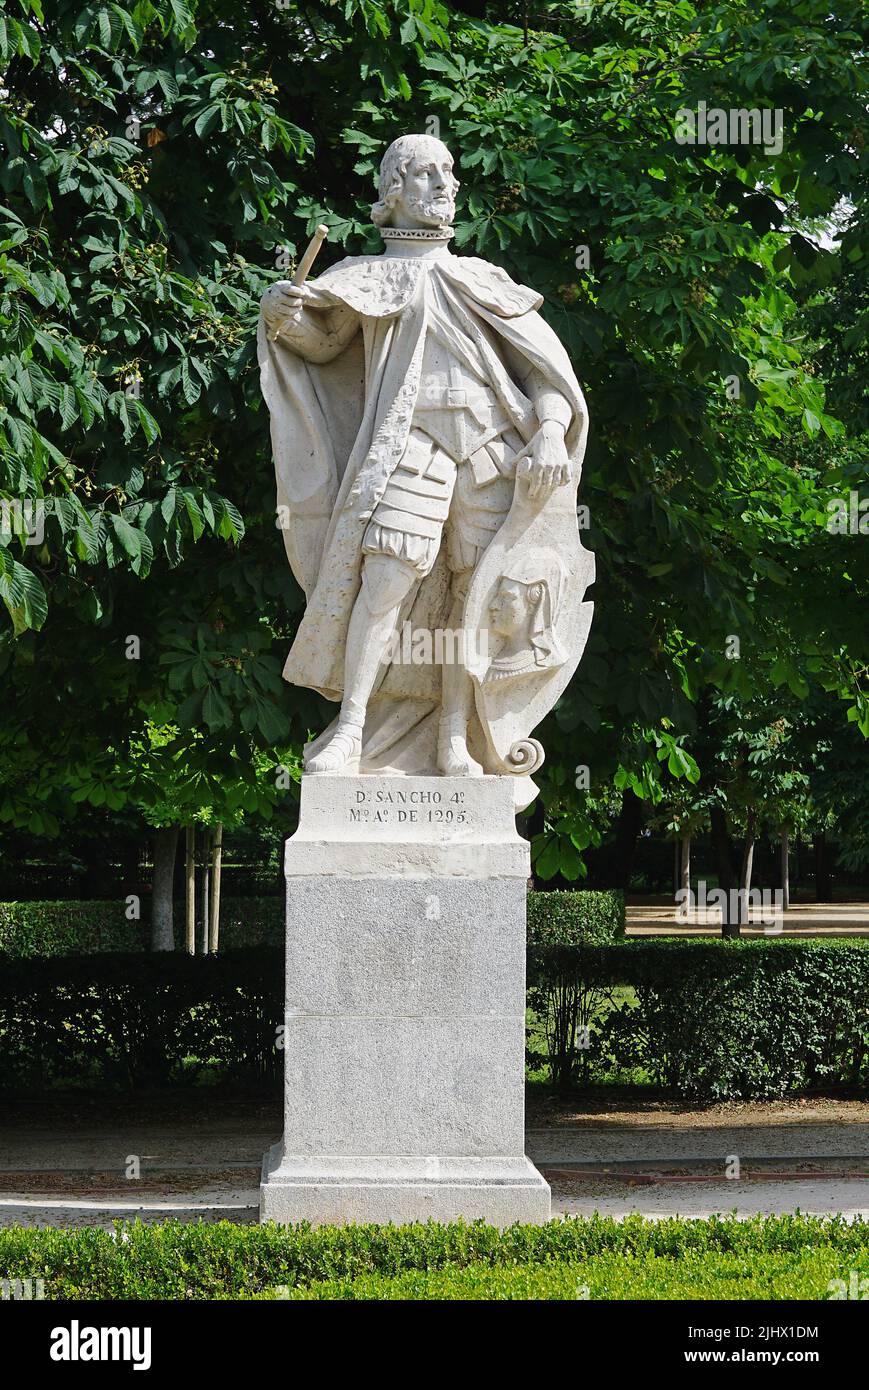 Statue of Sancho IV of Castile (1258 – 1295) king of Castile, León and Galicia,at the Buen Retiro Park,Parque del Buen Retiro in Madrid, Spain.El Retiro  first belonged to the Spanish Monarchy.Late 19th century it became a public park. Stock Photo